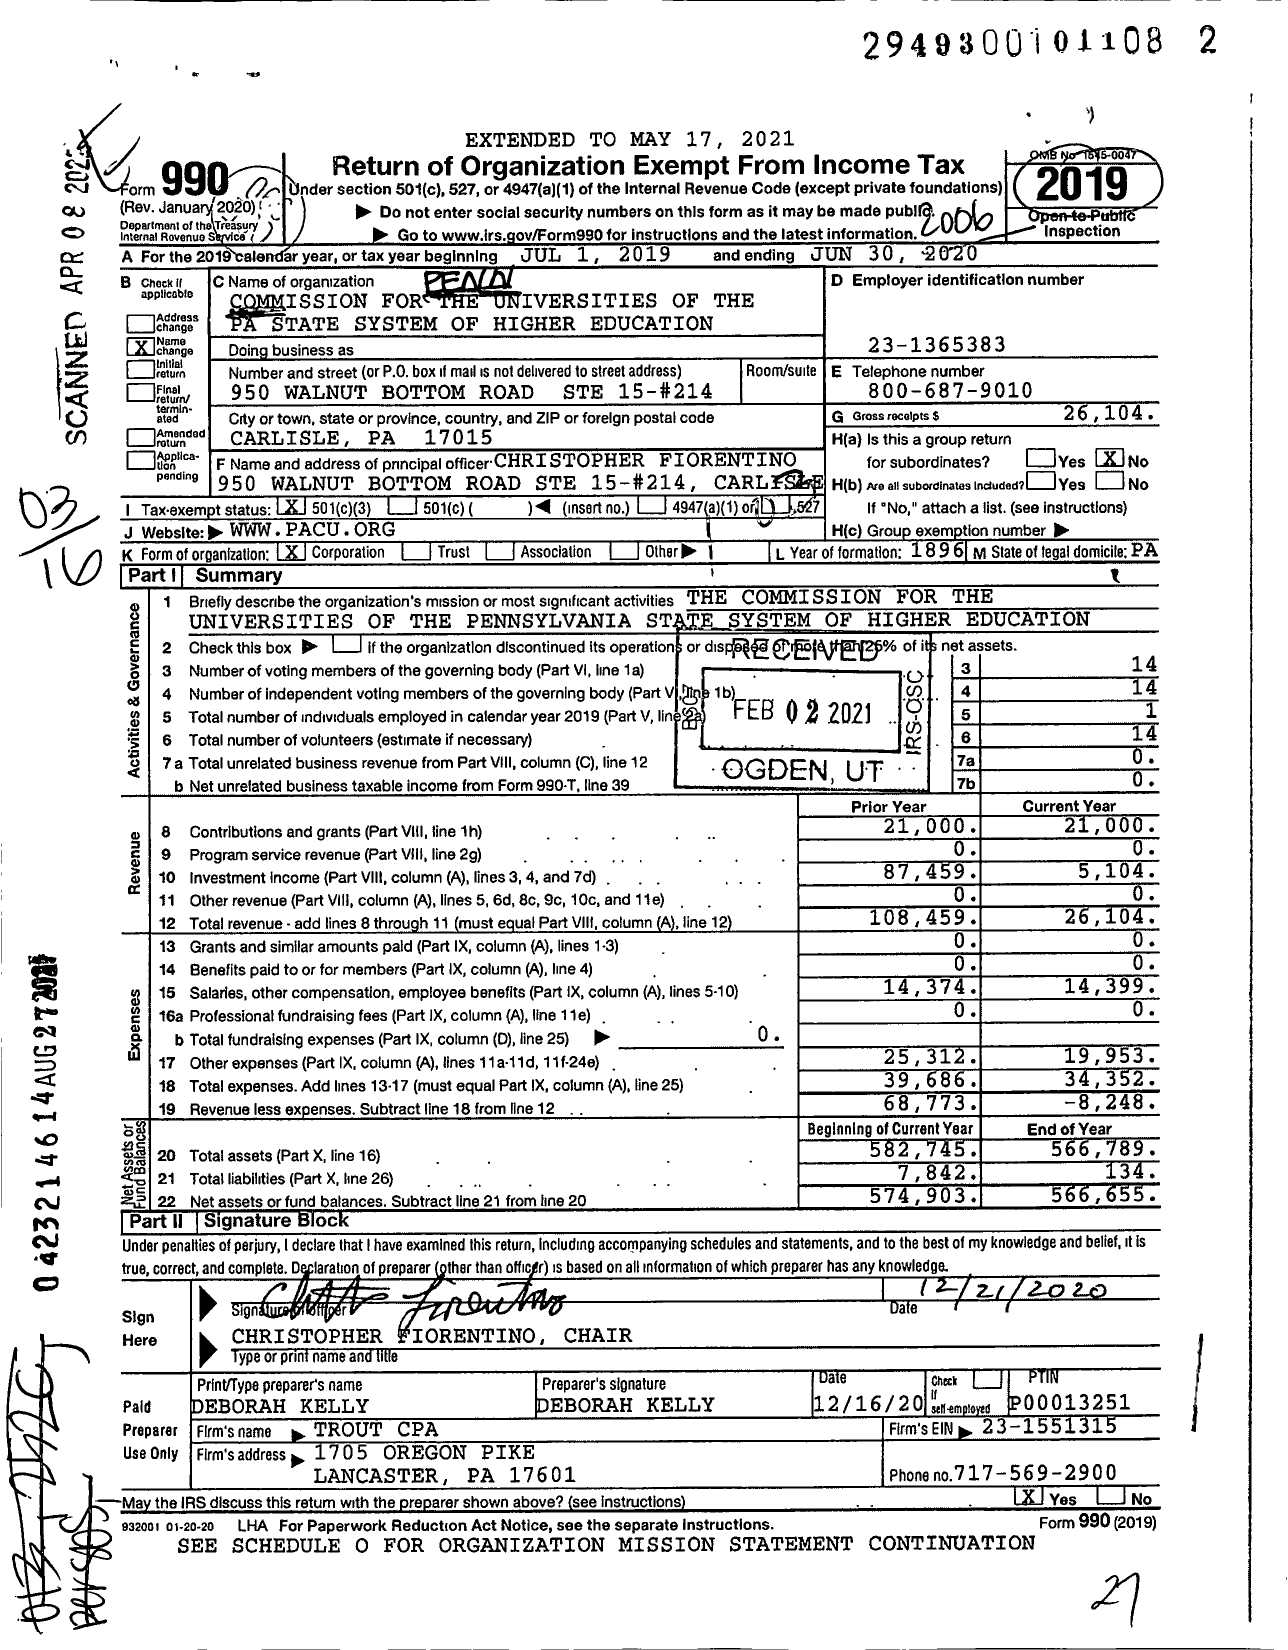 Image of first page of 2019 Form 990 for Commission for the Universities of the Pa State System of Higher Education